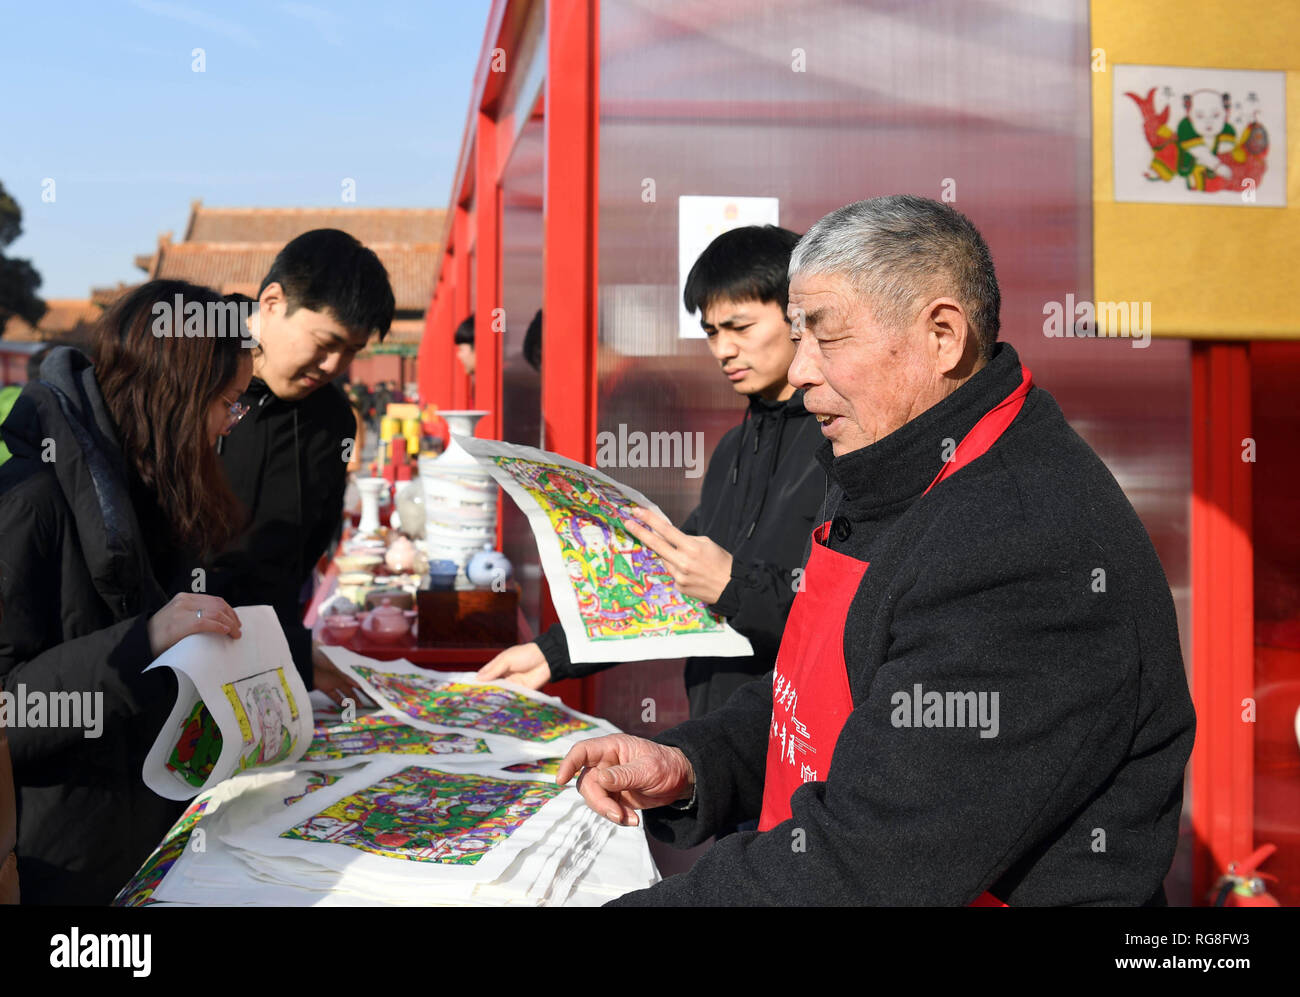 (190128) -- BEIJING, Jan. 28, 2019 (Xinhua) -- Folk artist Yin Guoquan (1st R) introduces New Year paintings to tourists during a fair at the Palace Museum in Beijing, capital of China, Jan. 28, 2019. About 150 Chinese time-honored brands, selected from some Chinese provinces and municipalities, are exhibited at a fair in the Palace Museum during the Spring Festival. The histories of many of the Chinese time-honored brands, ranging from local delicacies, liquors, health products to silk and handicrafts, can be traced back to the Qing Dynasty (1644-1911) when their products were exclusive tribu Stock Photo